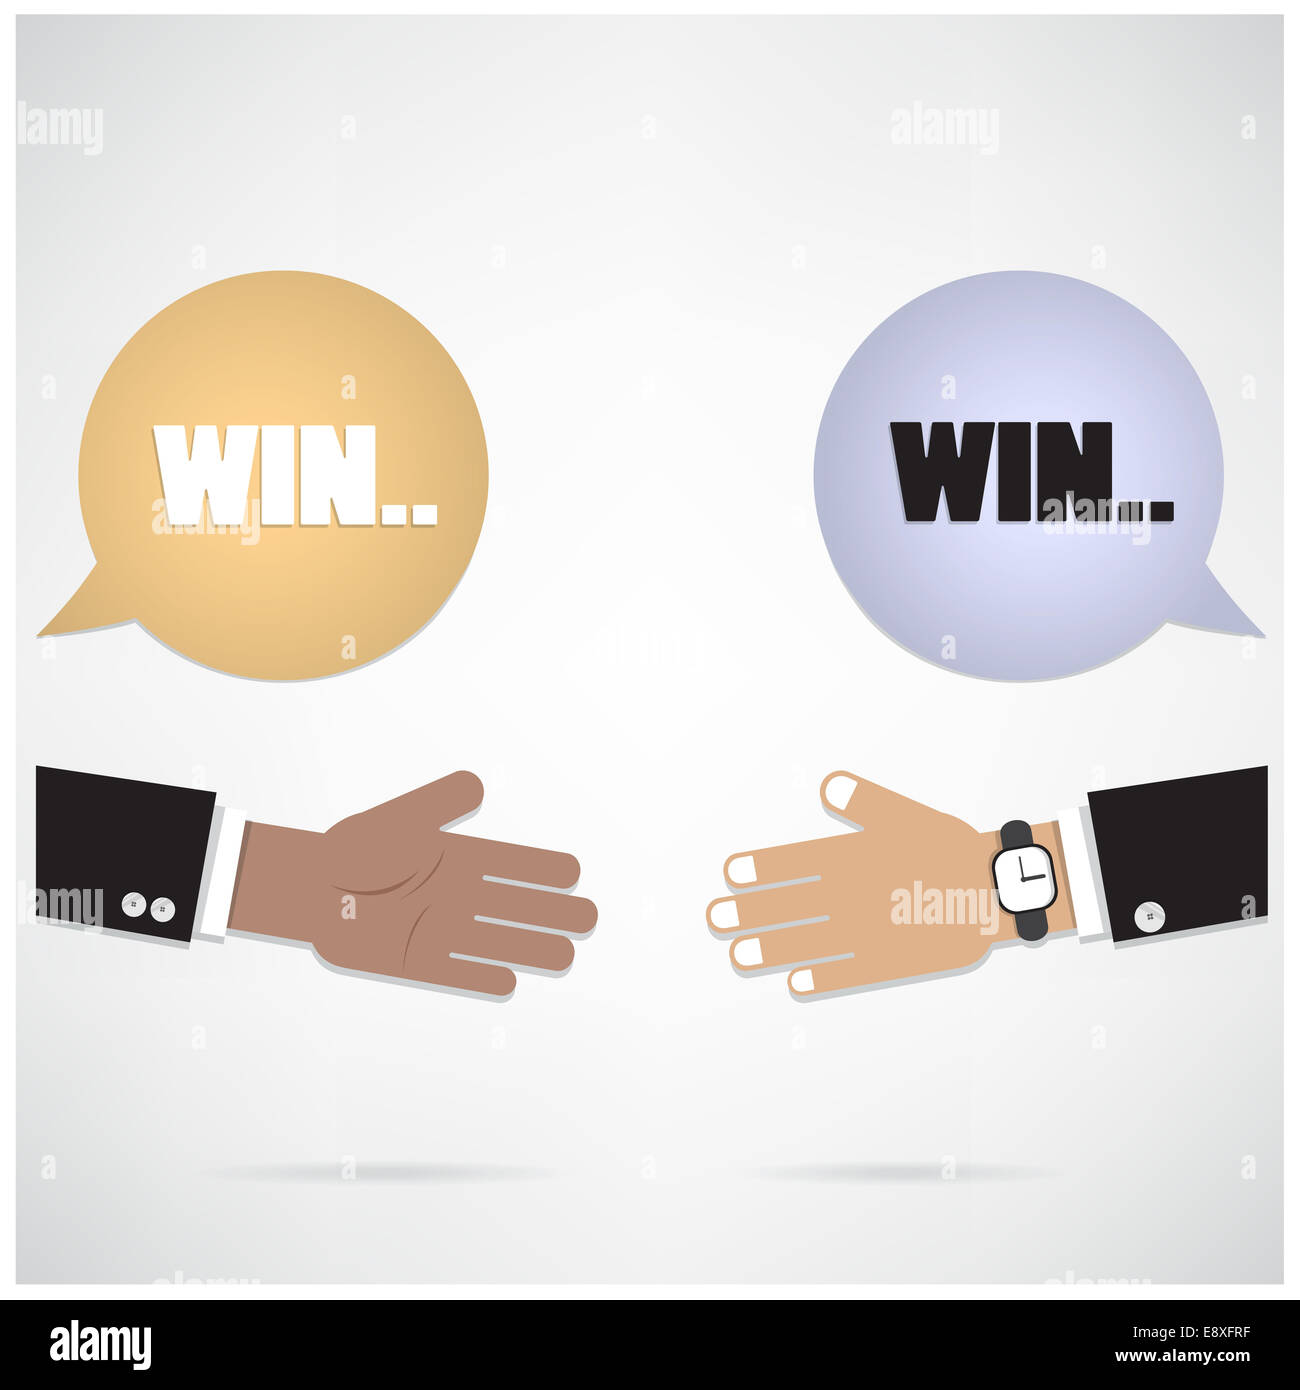 Businessman hands with speech bubble .Handshake or partnership concept. Win-win background.Business meeting idea. Stock Photo